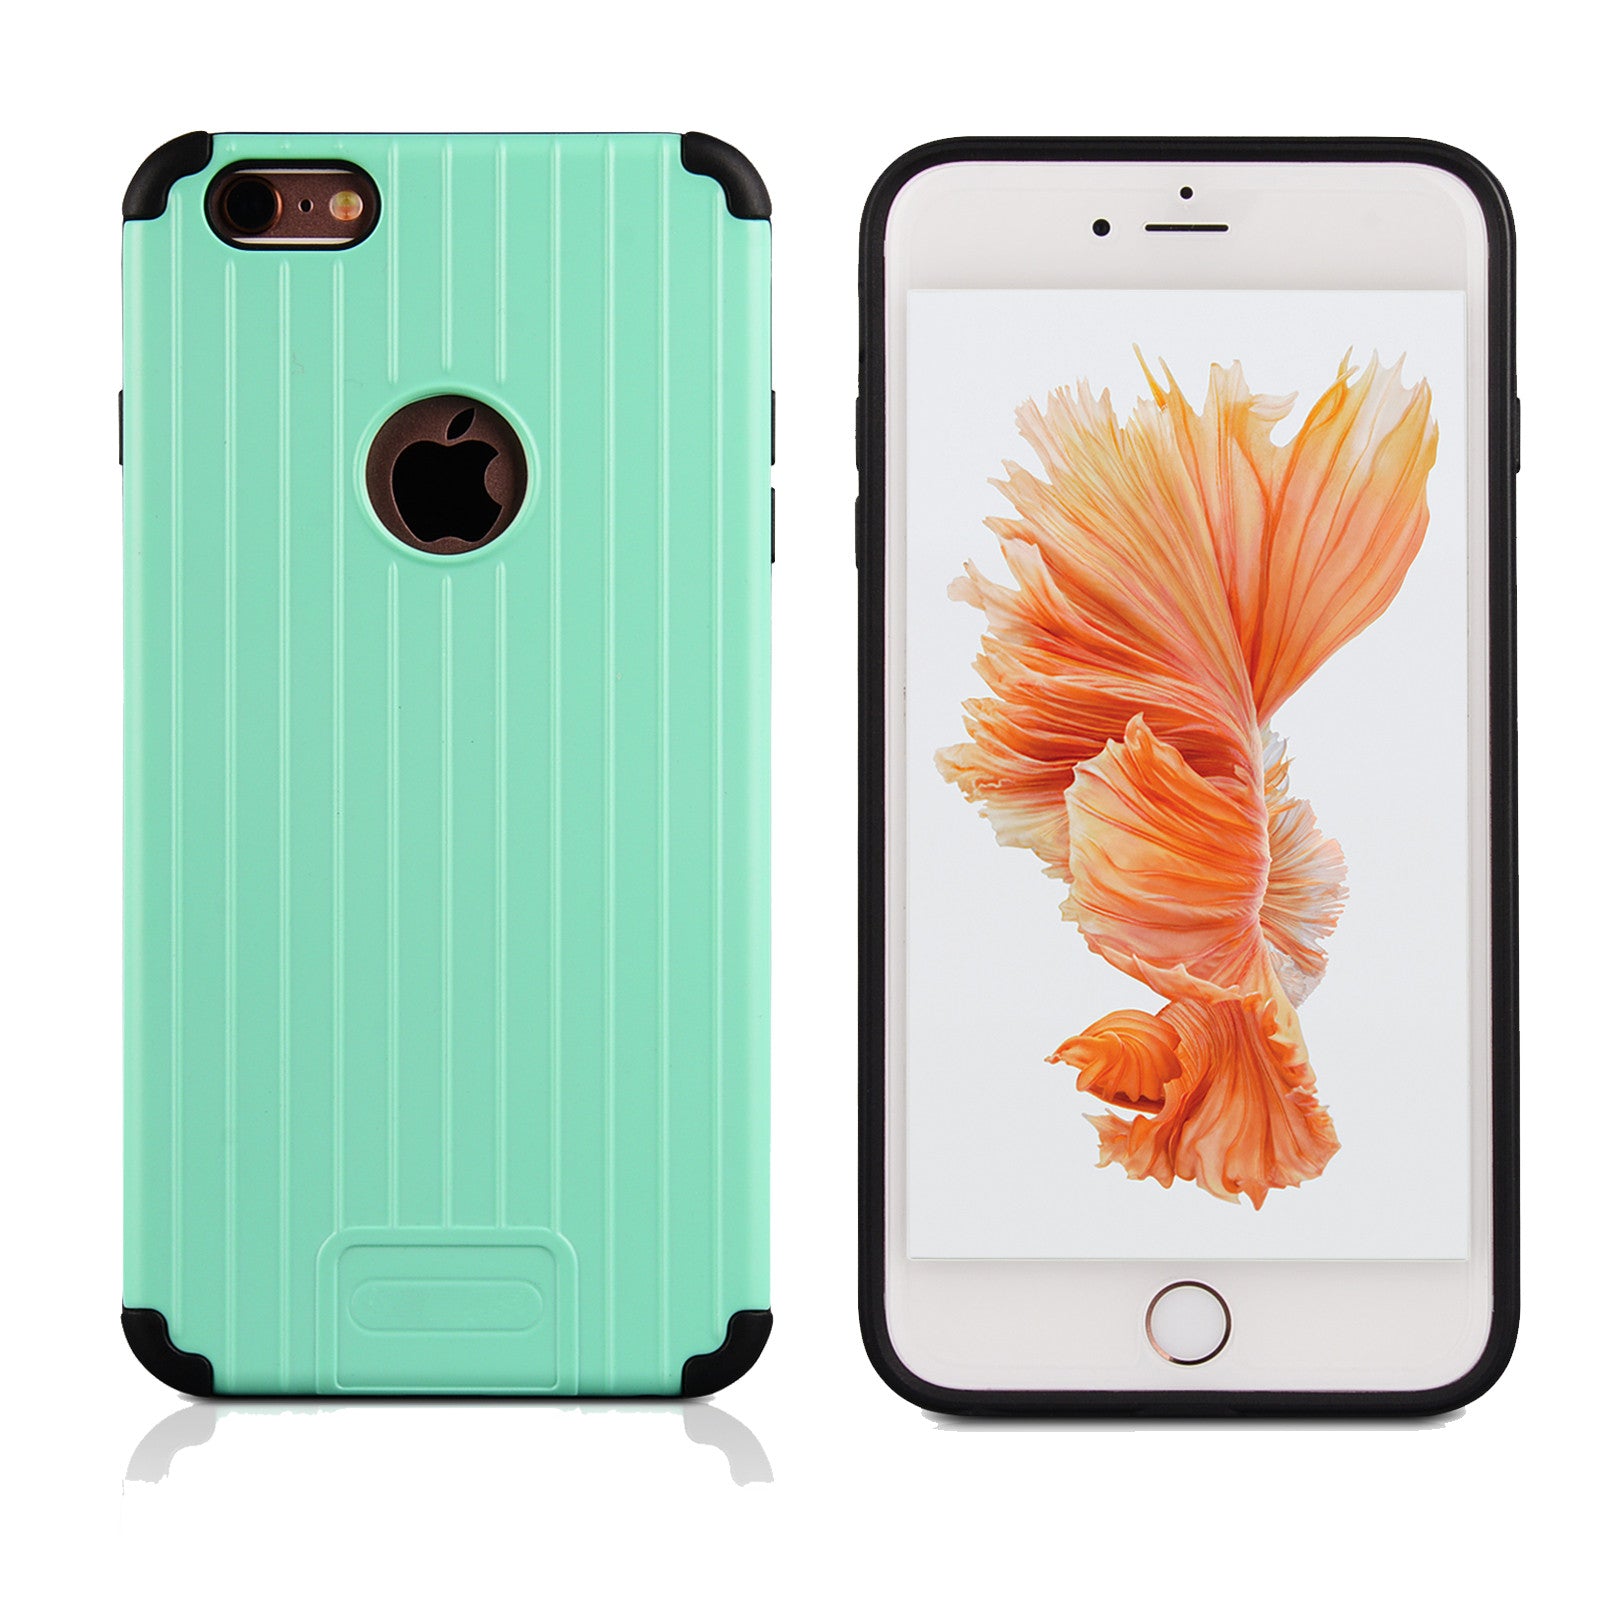 NAVOR Kario Groove Dual Layer Protective Case for 4.7-inch iPhone 6s / 6